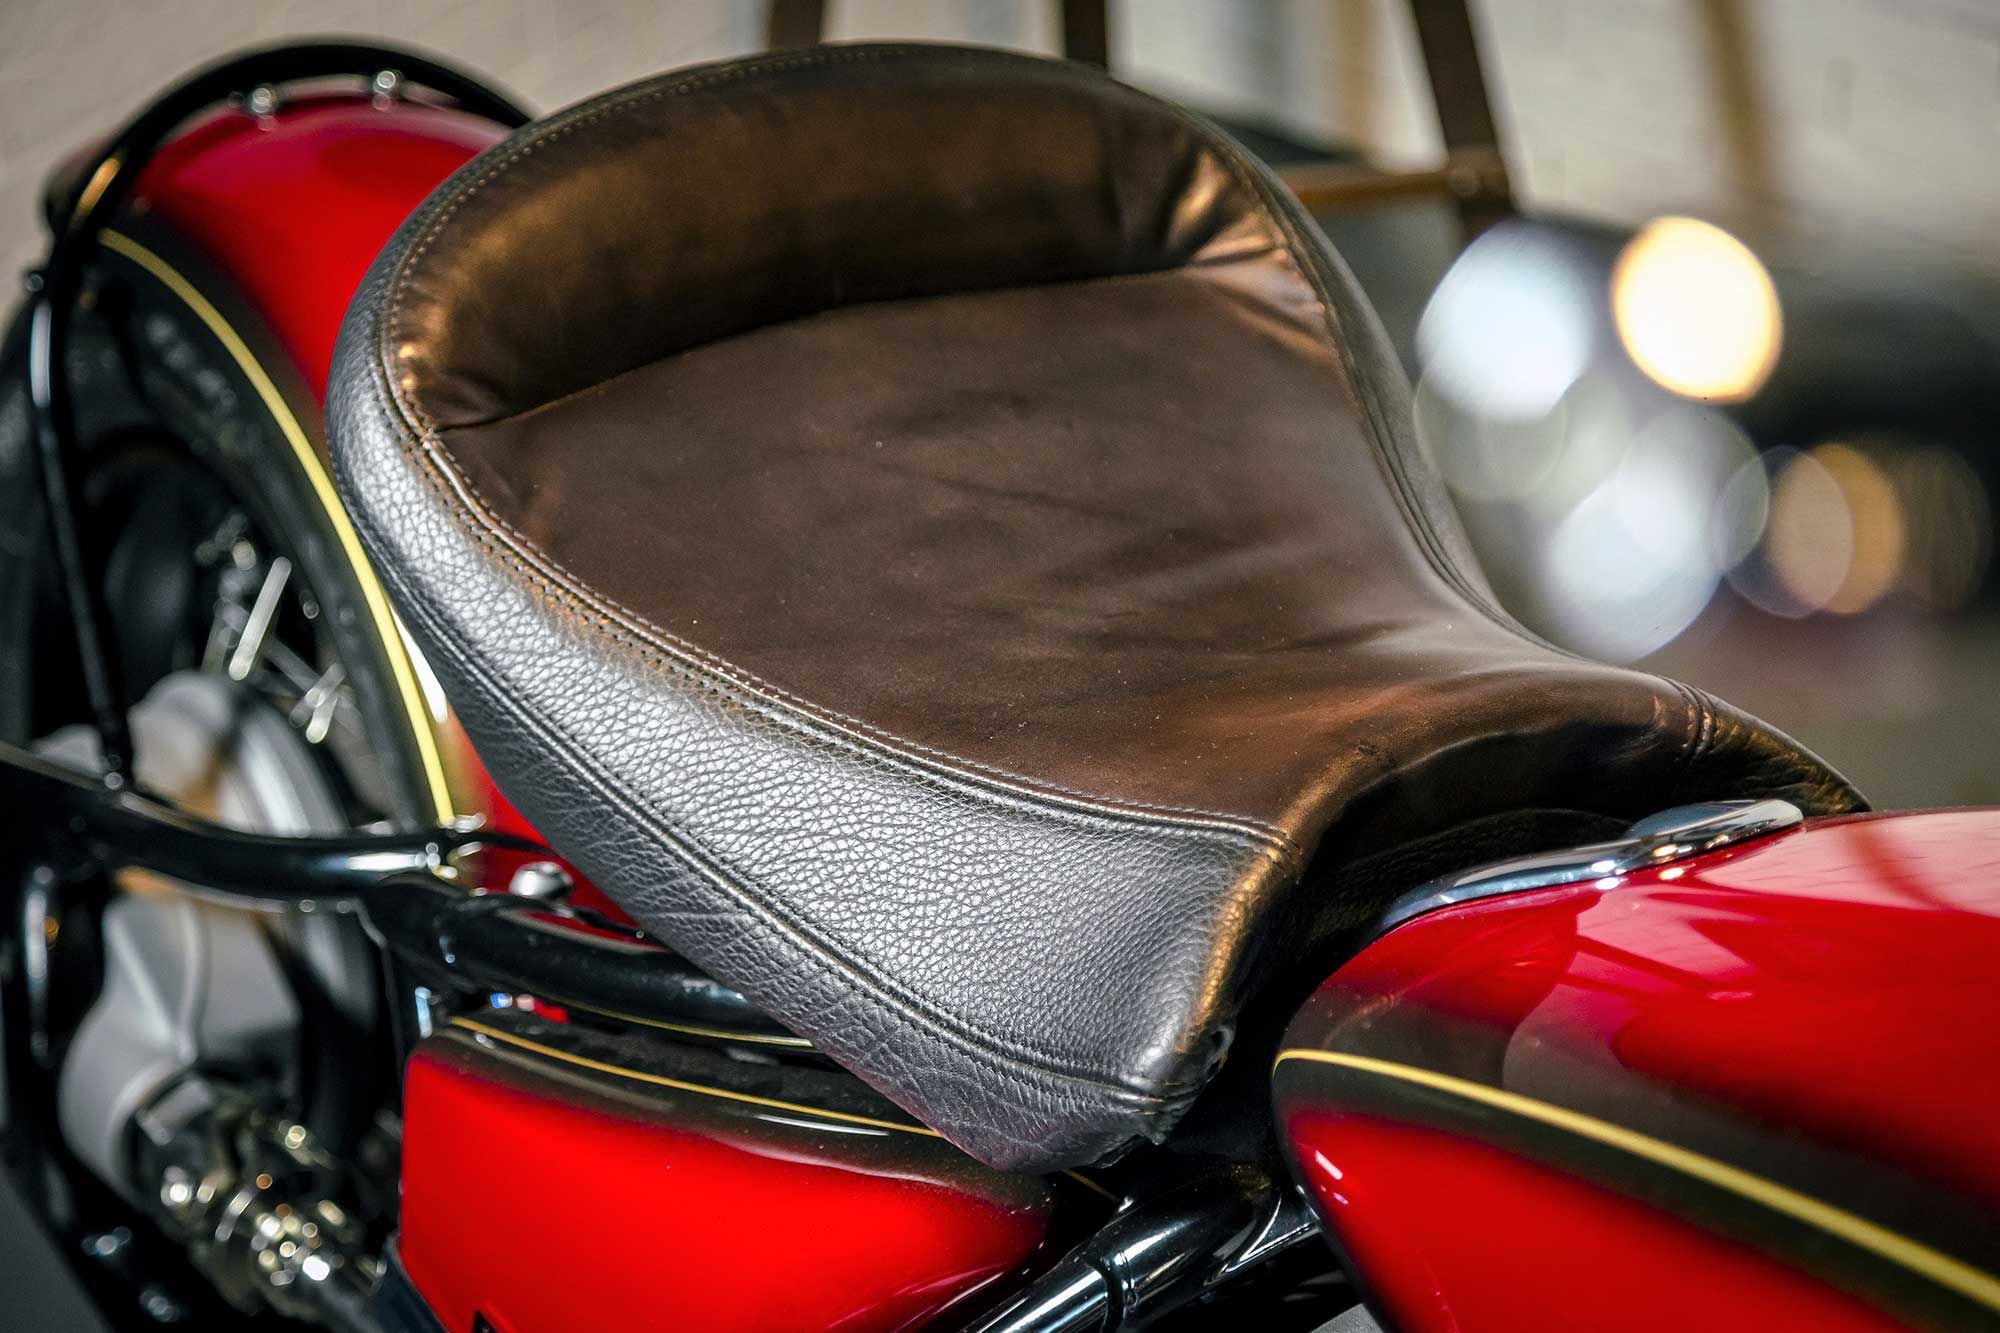 Other BMW parts contributed to the final build. The seat is off the old 1200C.